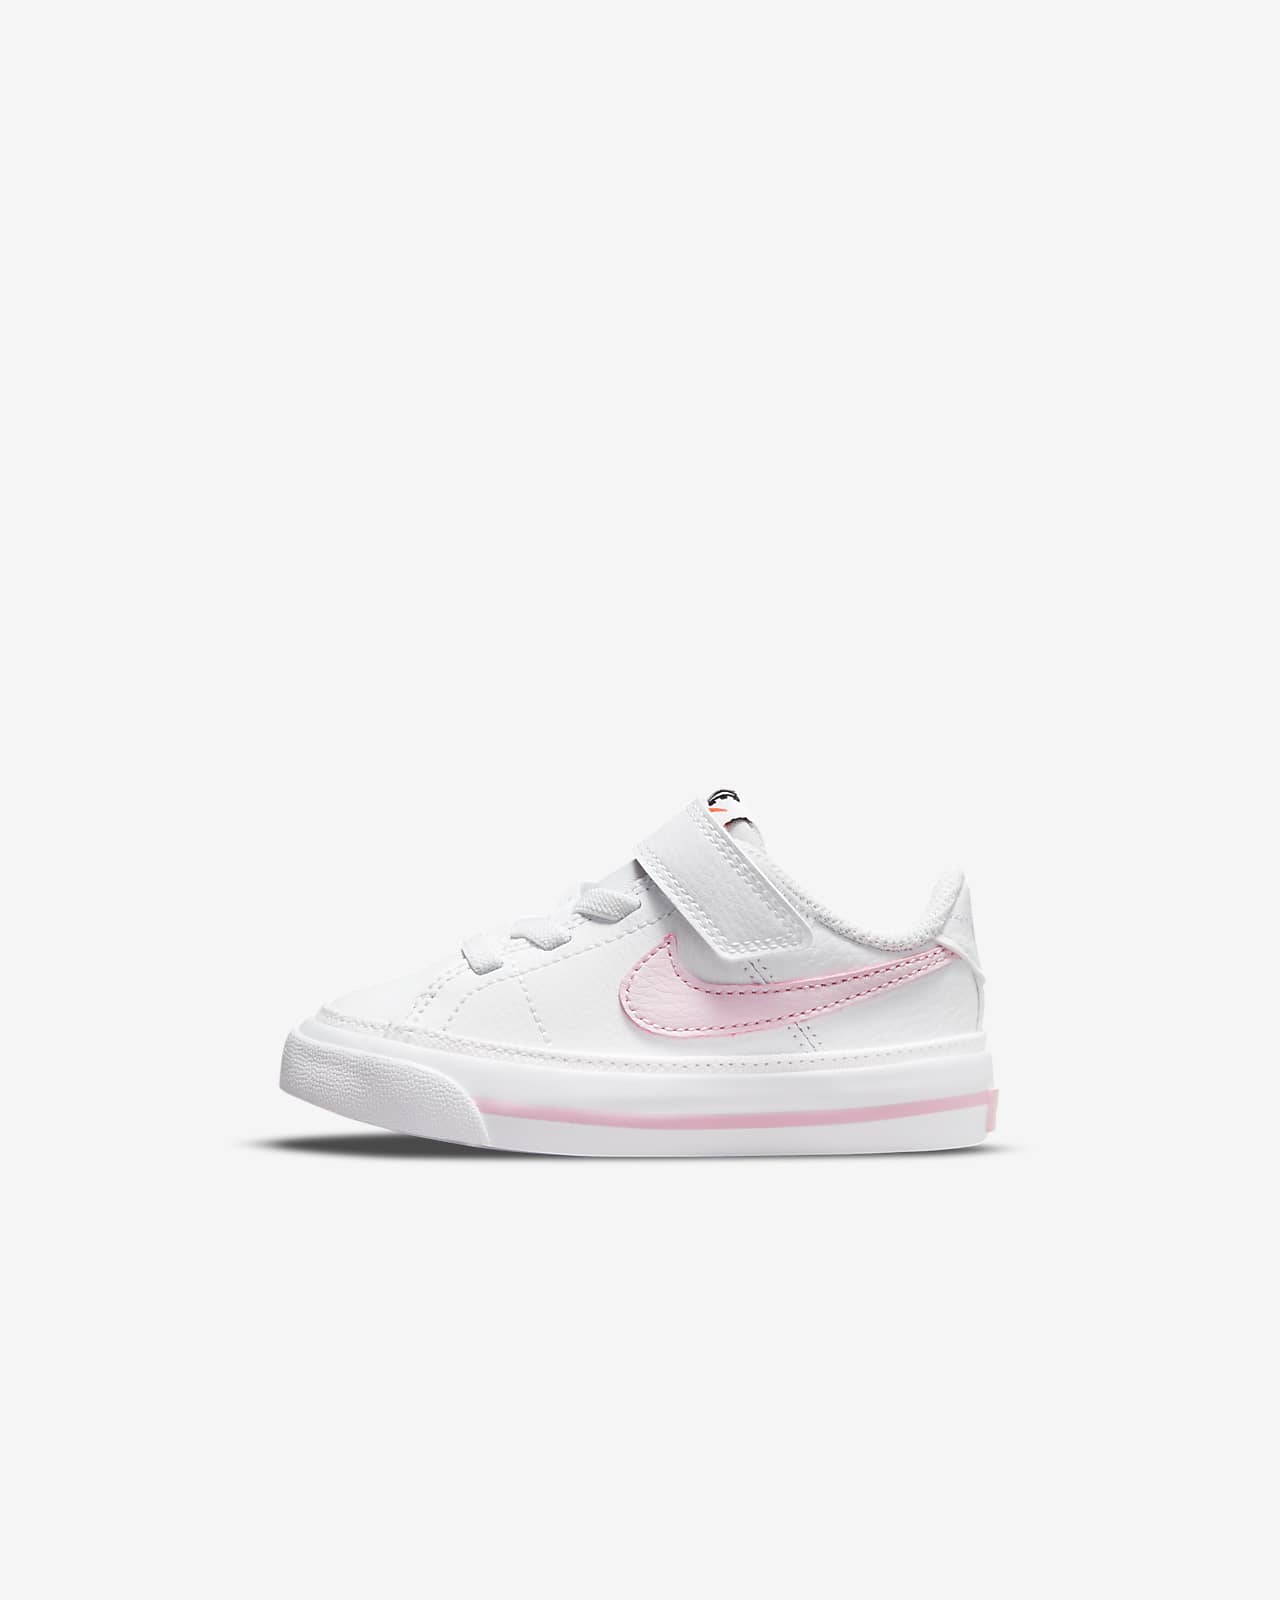 NikeCourt Legacy Baby/Toddler Shoes